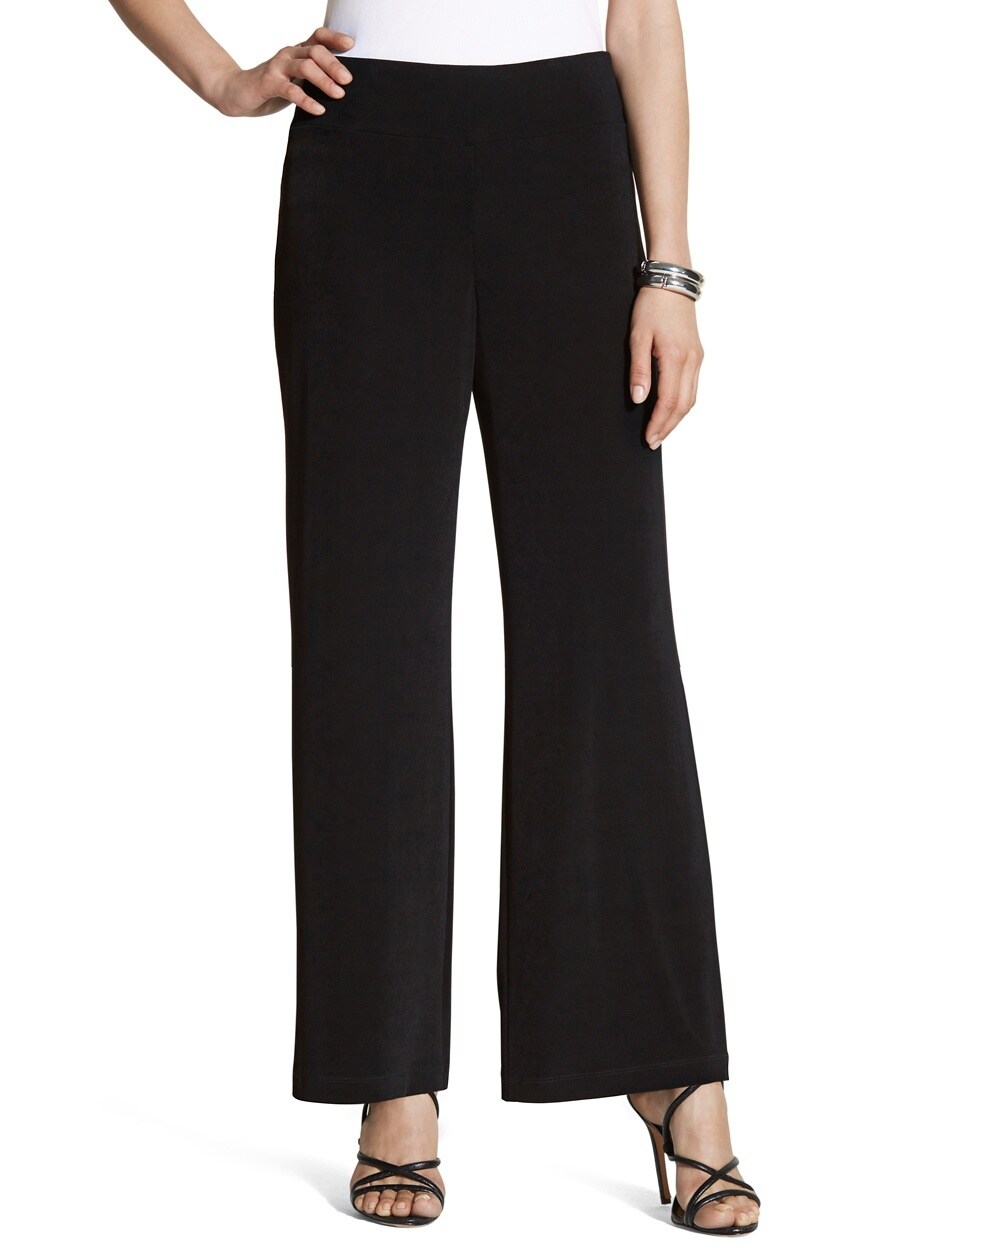 Wide Waistband Pants - Chicos